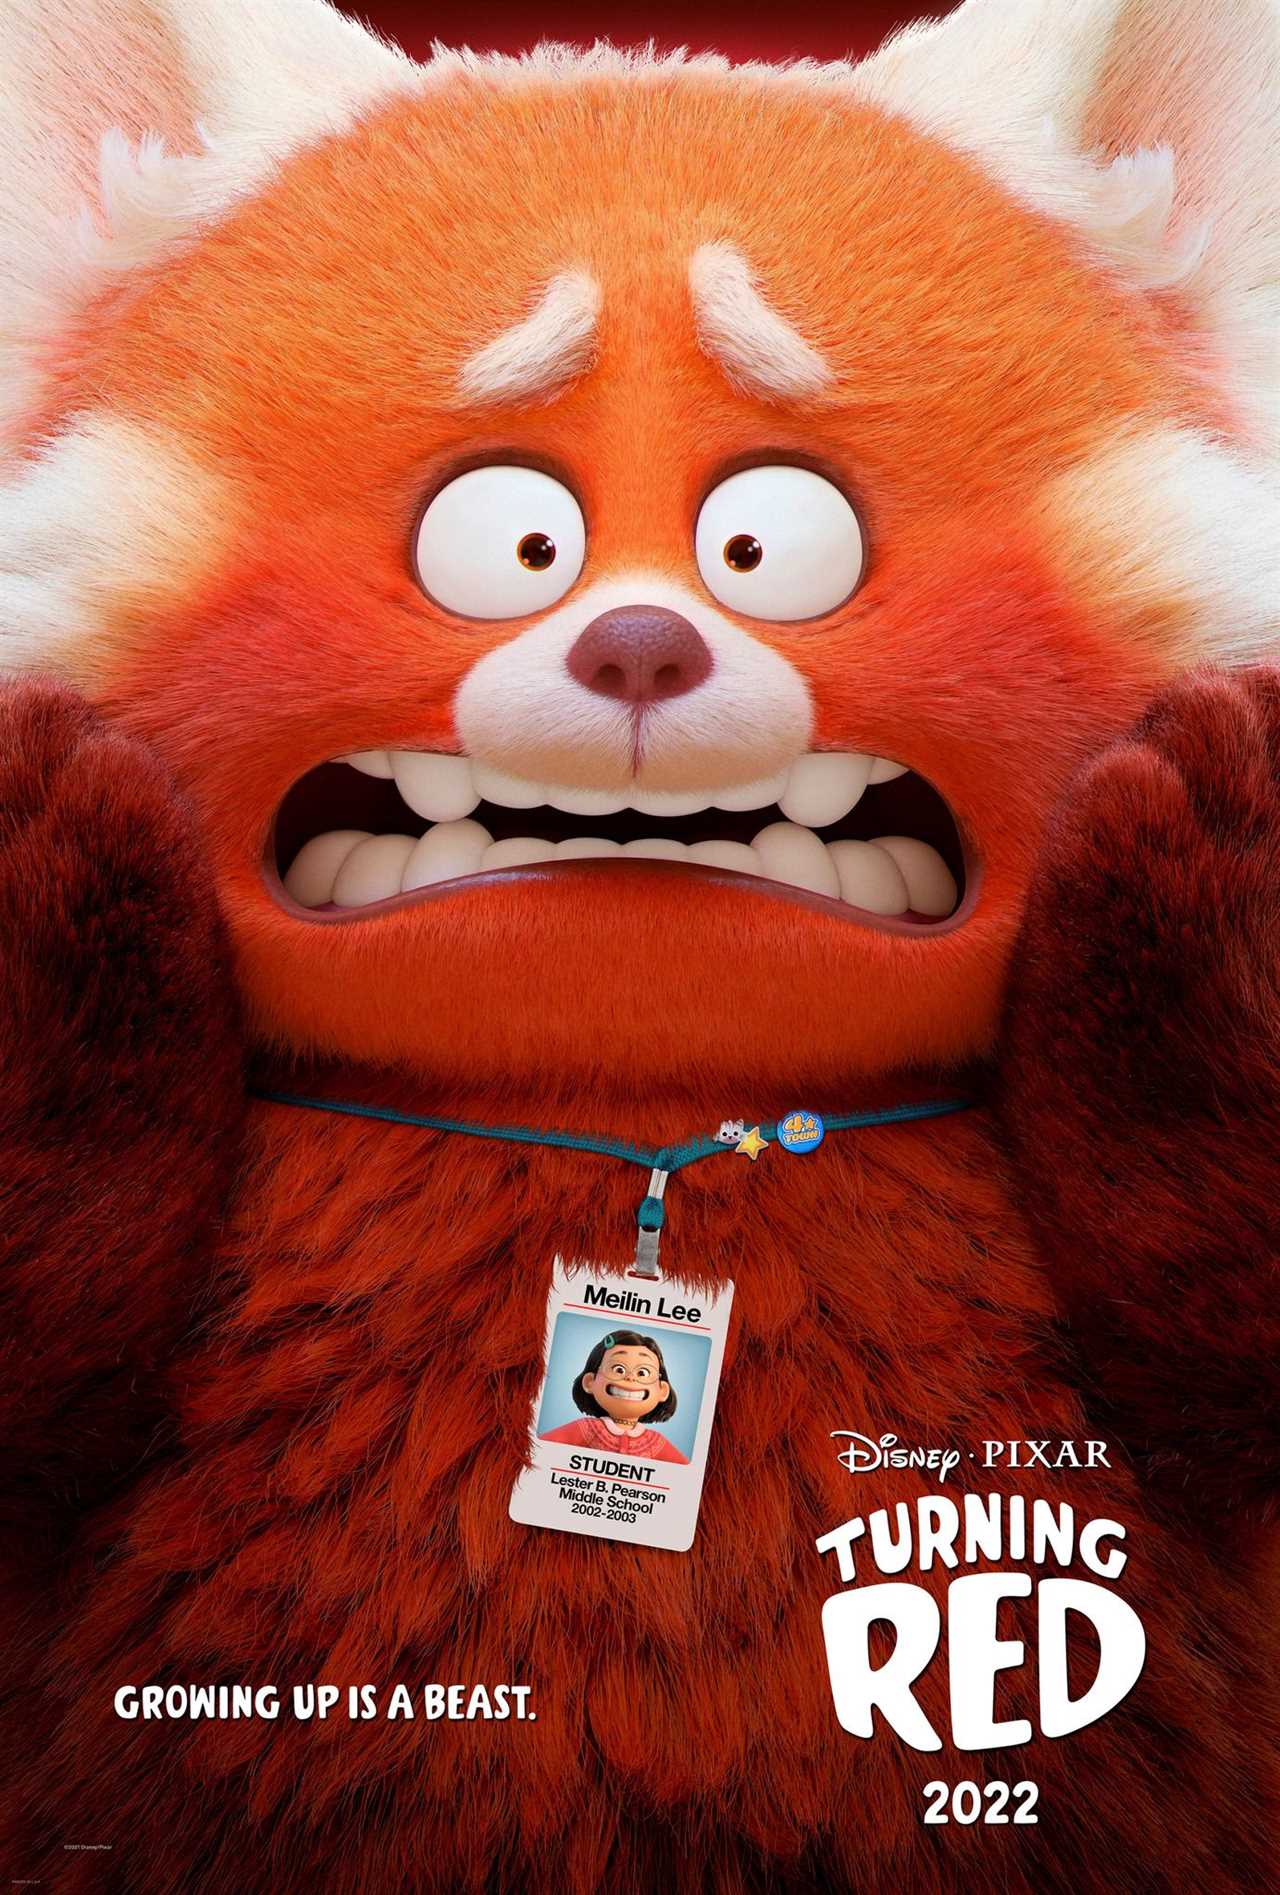 Turning Red Trailer: New Pixar Movie Finds a Girl Turning Into a Red Panda